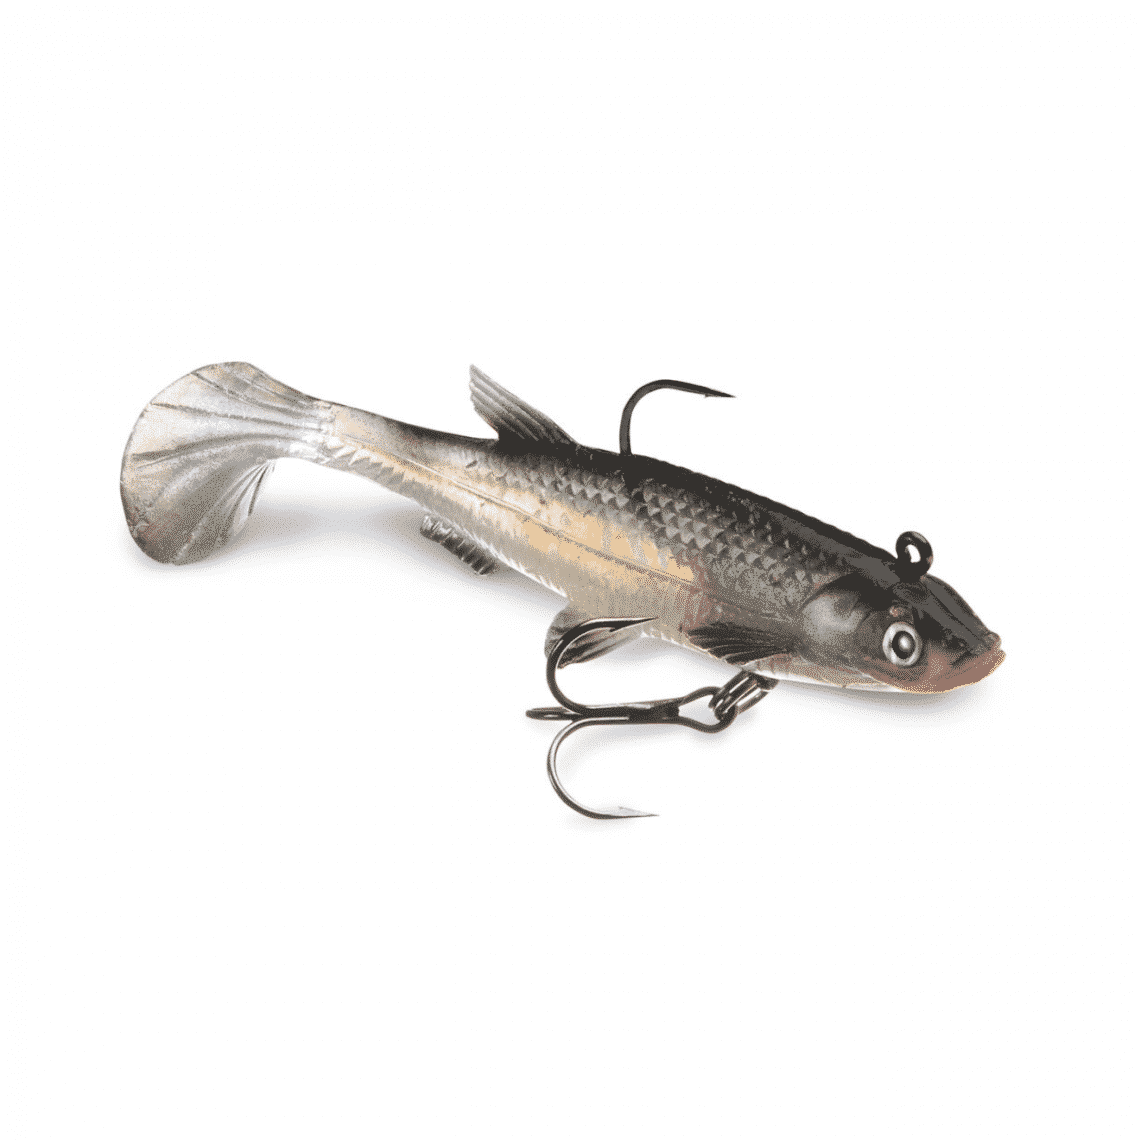 CLOSEOUT** STORM WILDEYE 1IN LIVE MINNOW - 3PK - Northwoods Wholesale Outlet